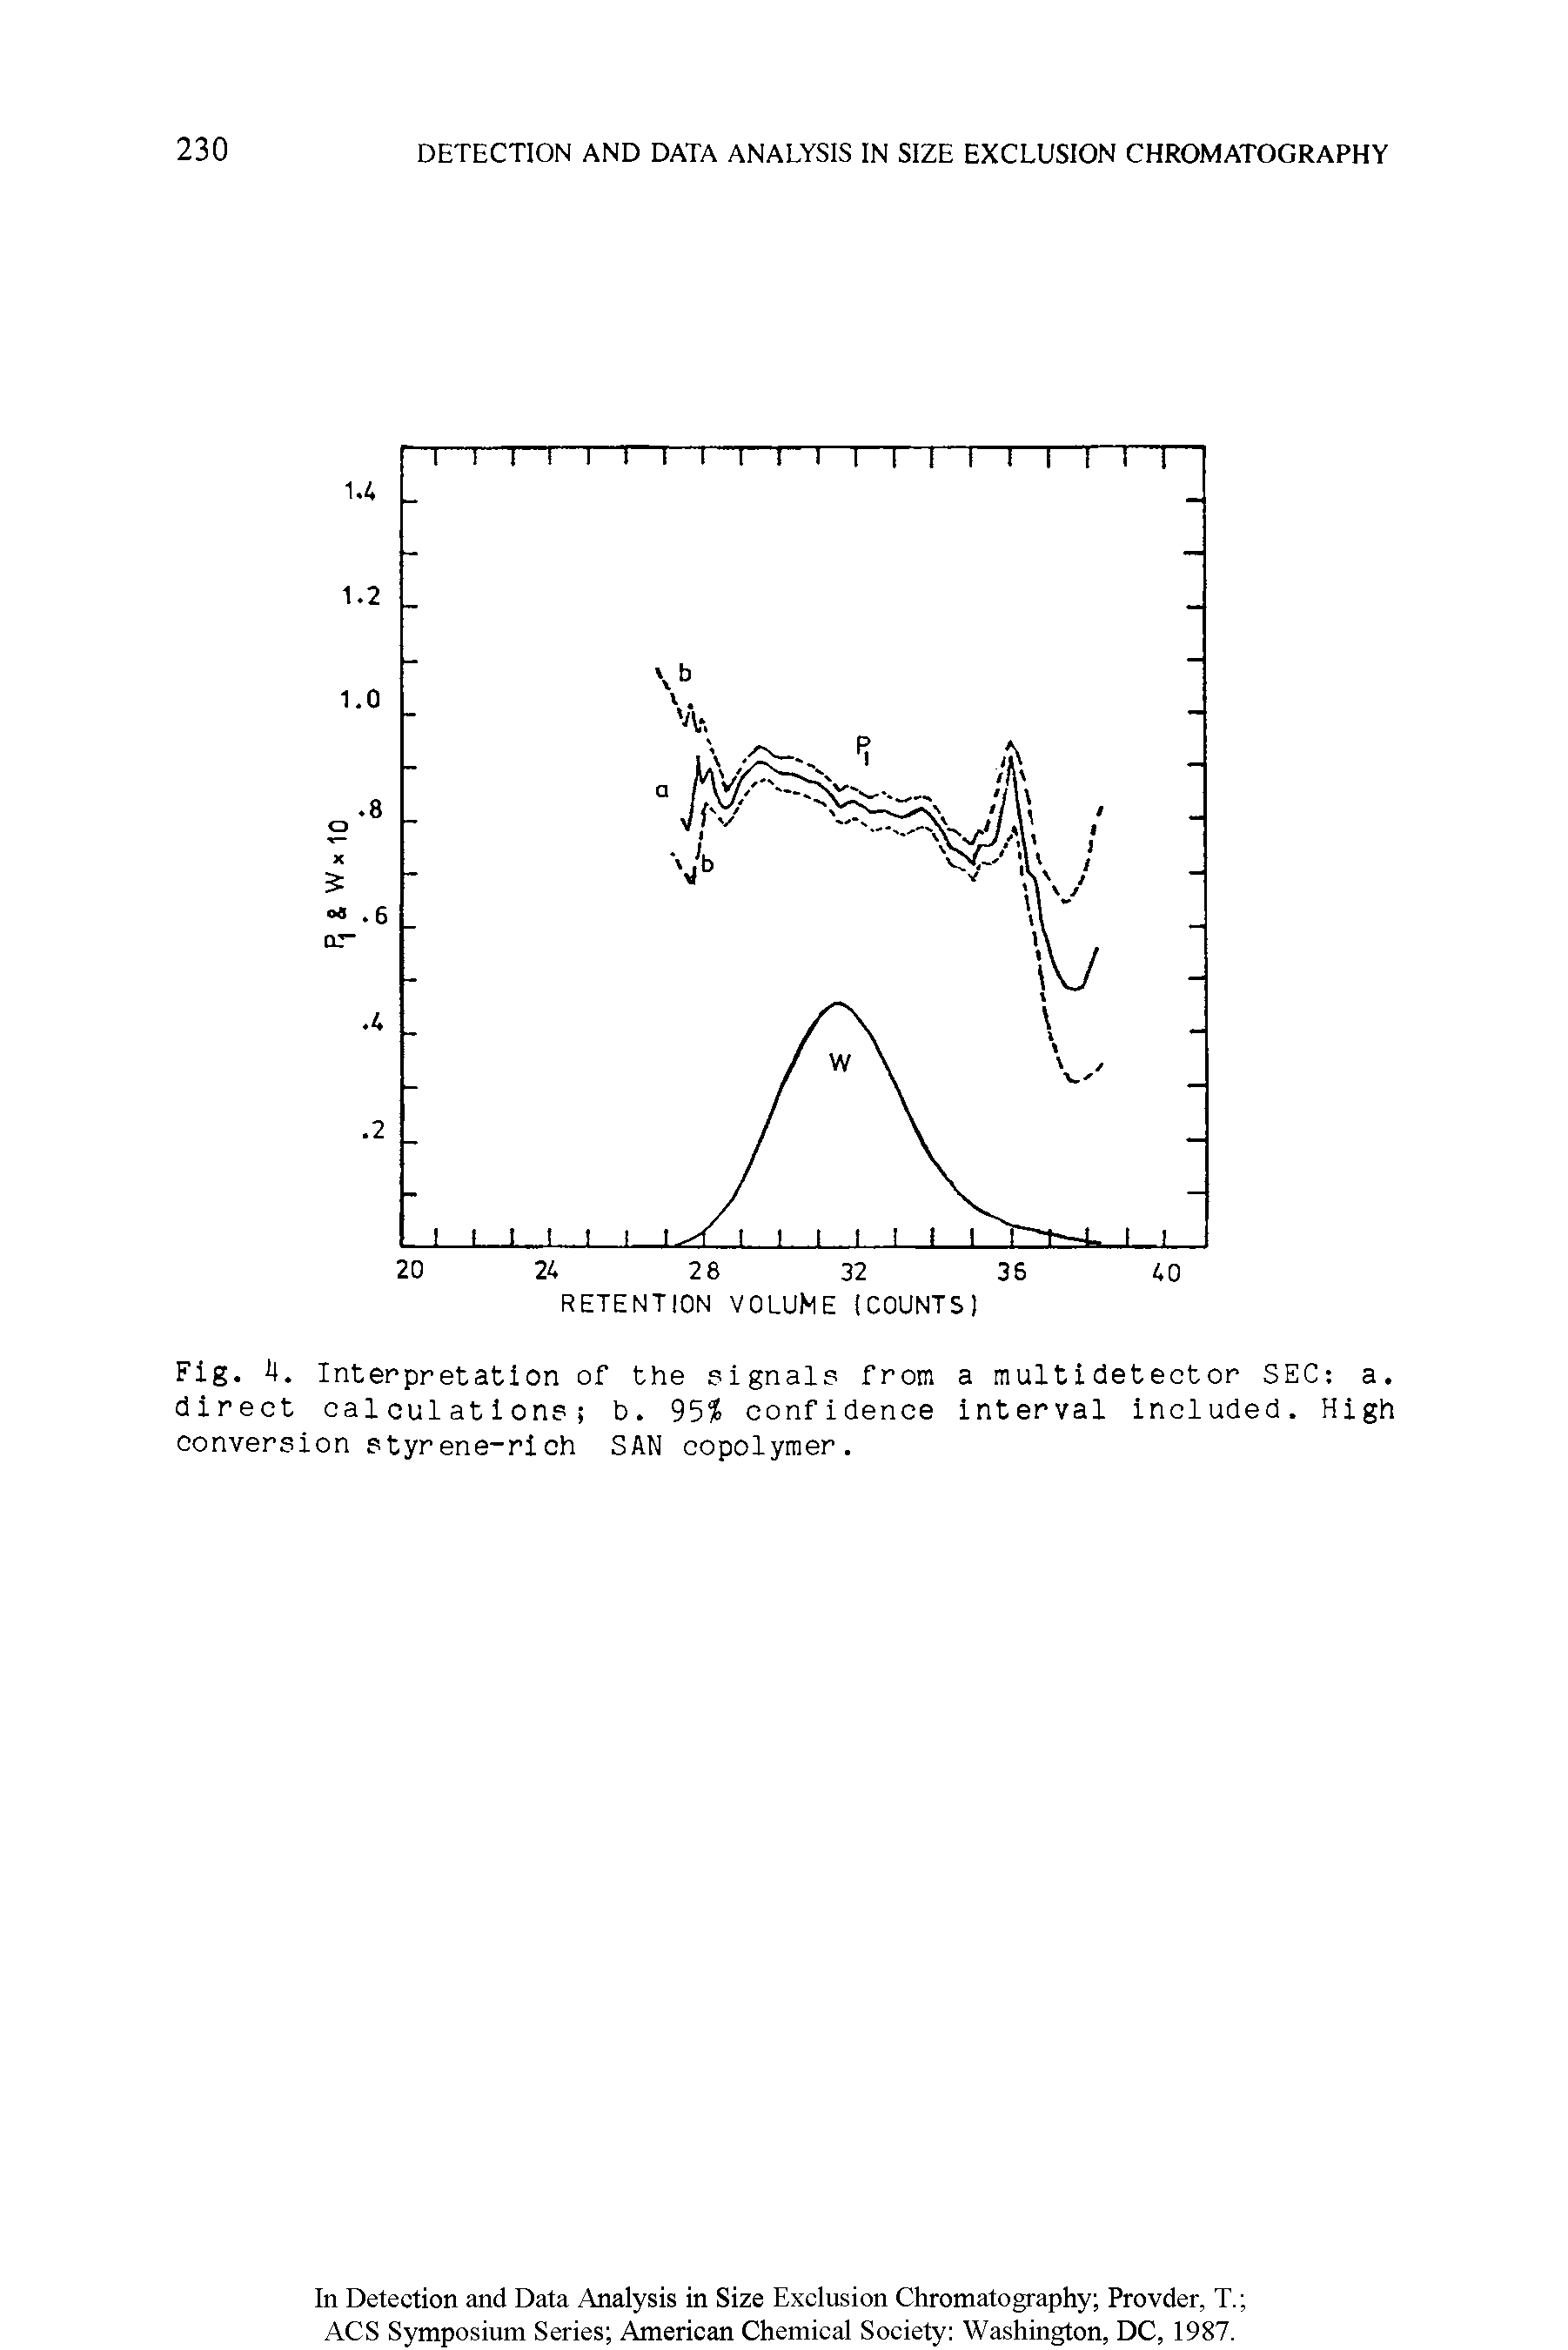 Fig. 4. Interpretation of the plgnal from a multidetector SEC a. direct cal culat 1 one b. 95 confidence Interval Included. High conversion styrene-rloh SAN copolymer.